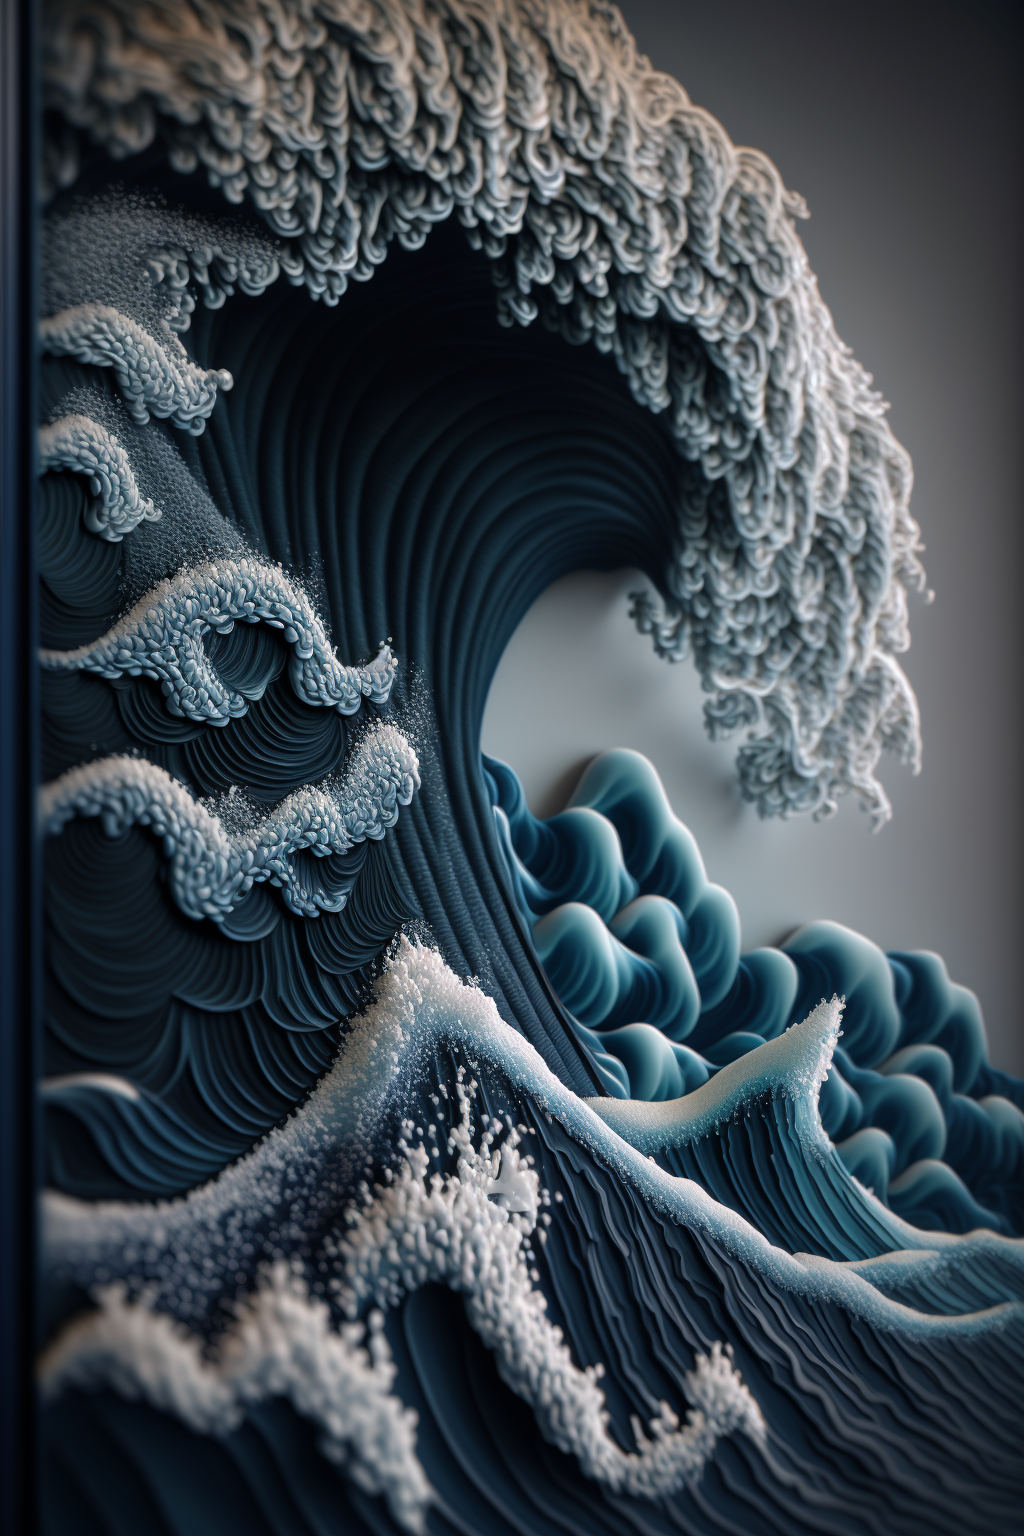 The Great Knitted Wave